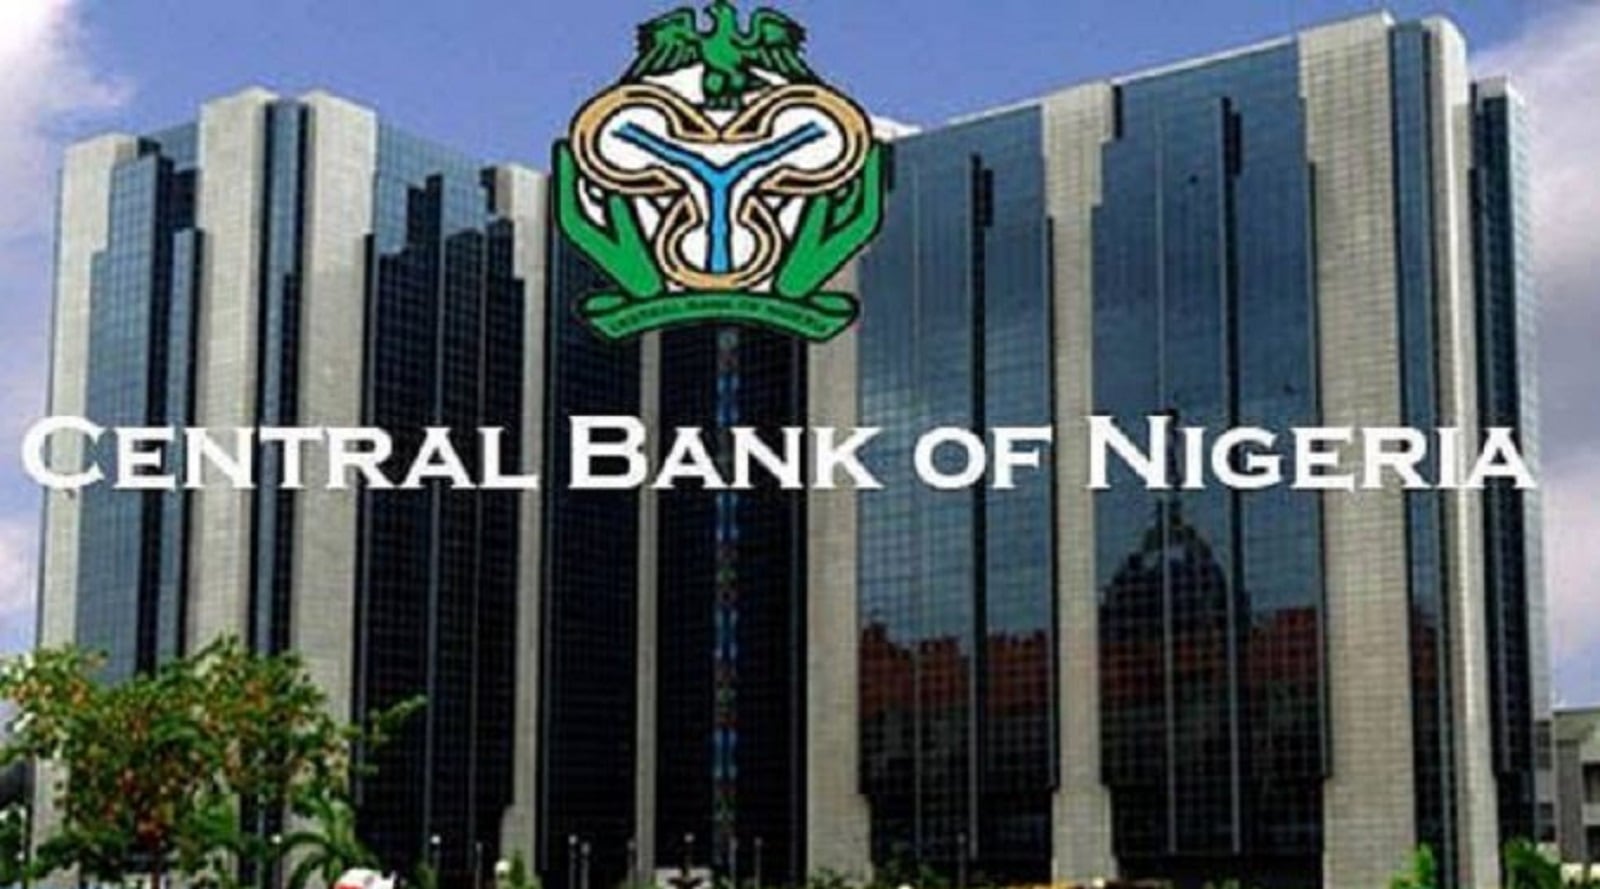  Central Bank of Nigeria: Benchmark interest rate raised to 14% 